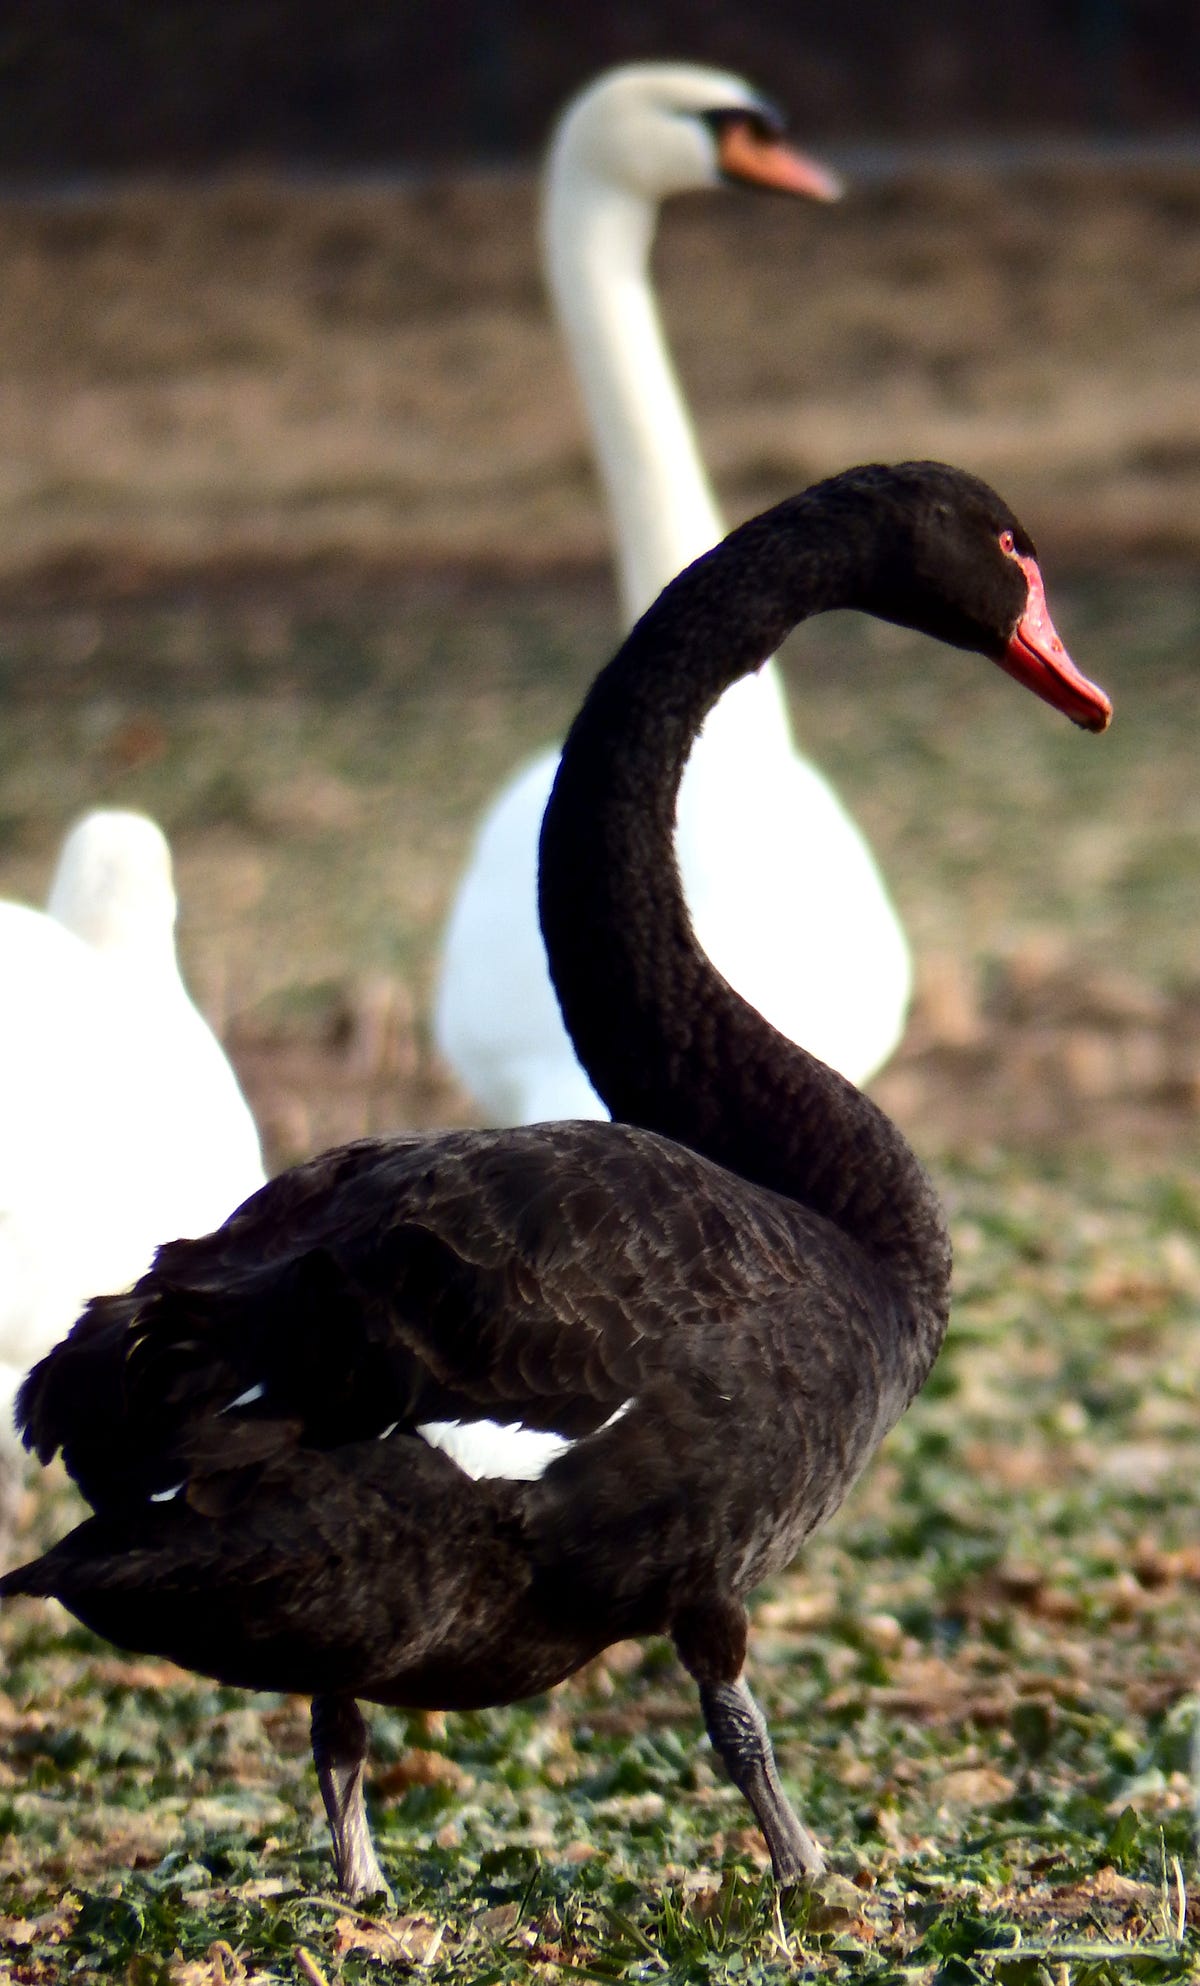 Black Swans and Other Common-Rare Phenomena | by SWRM Labs | Medium